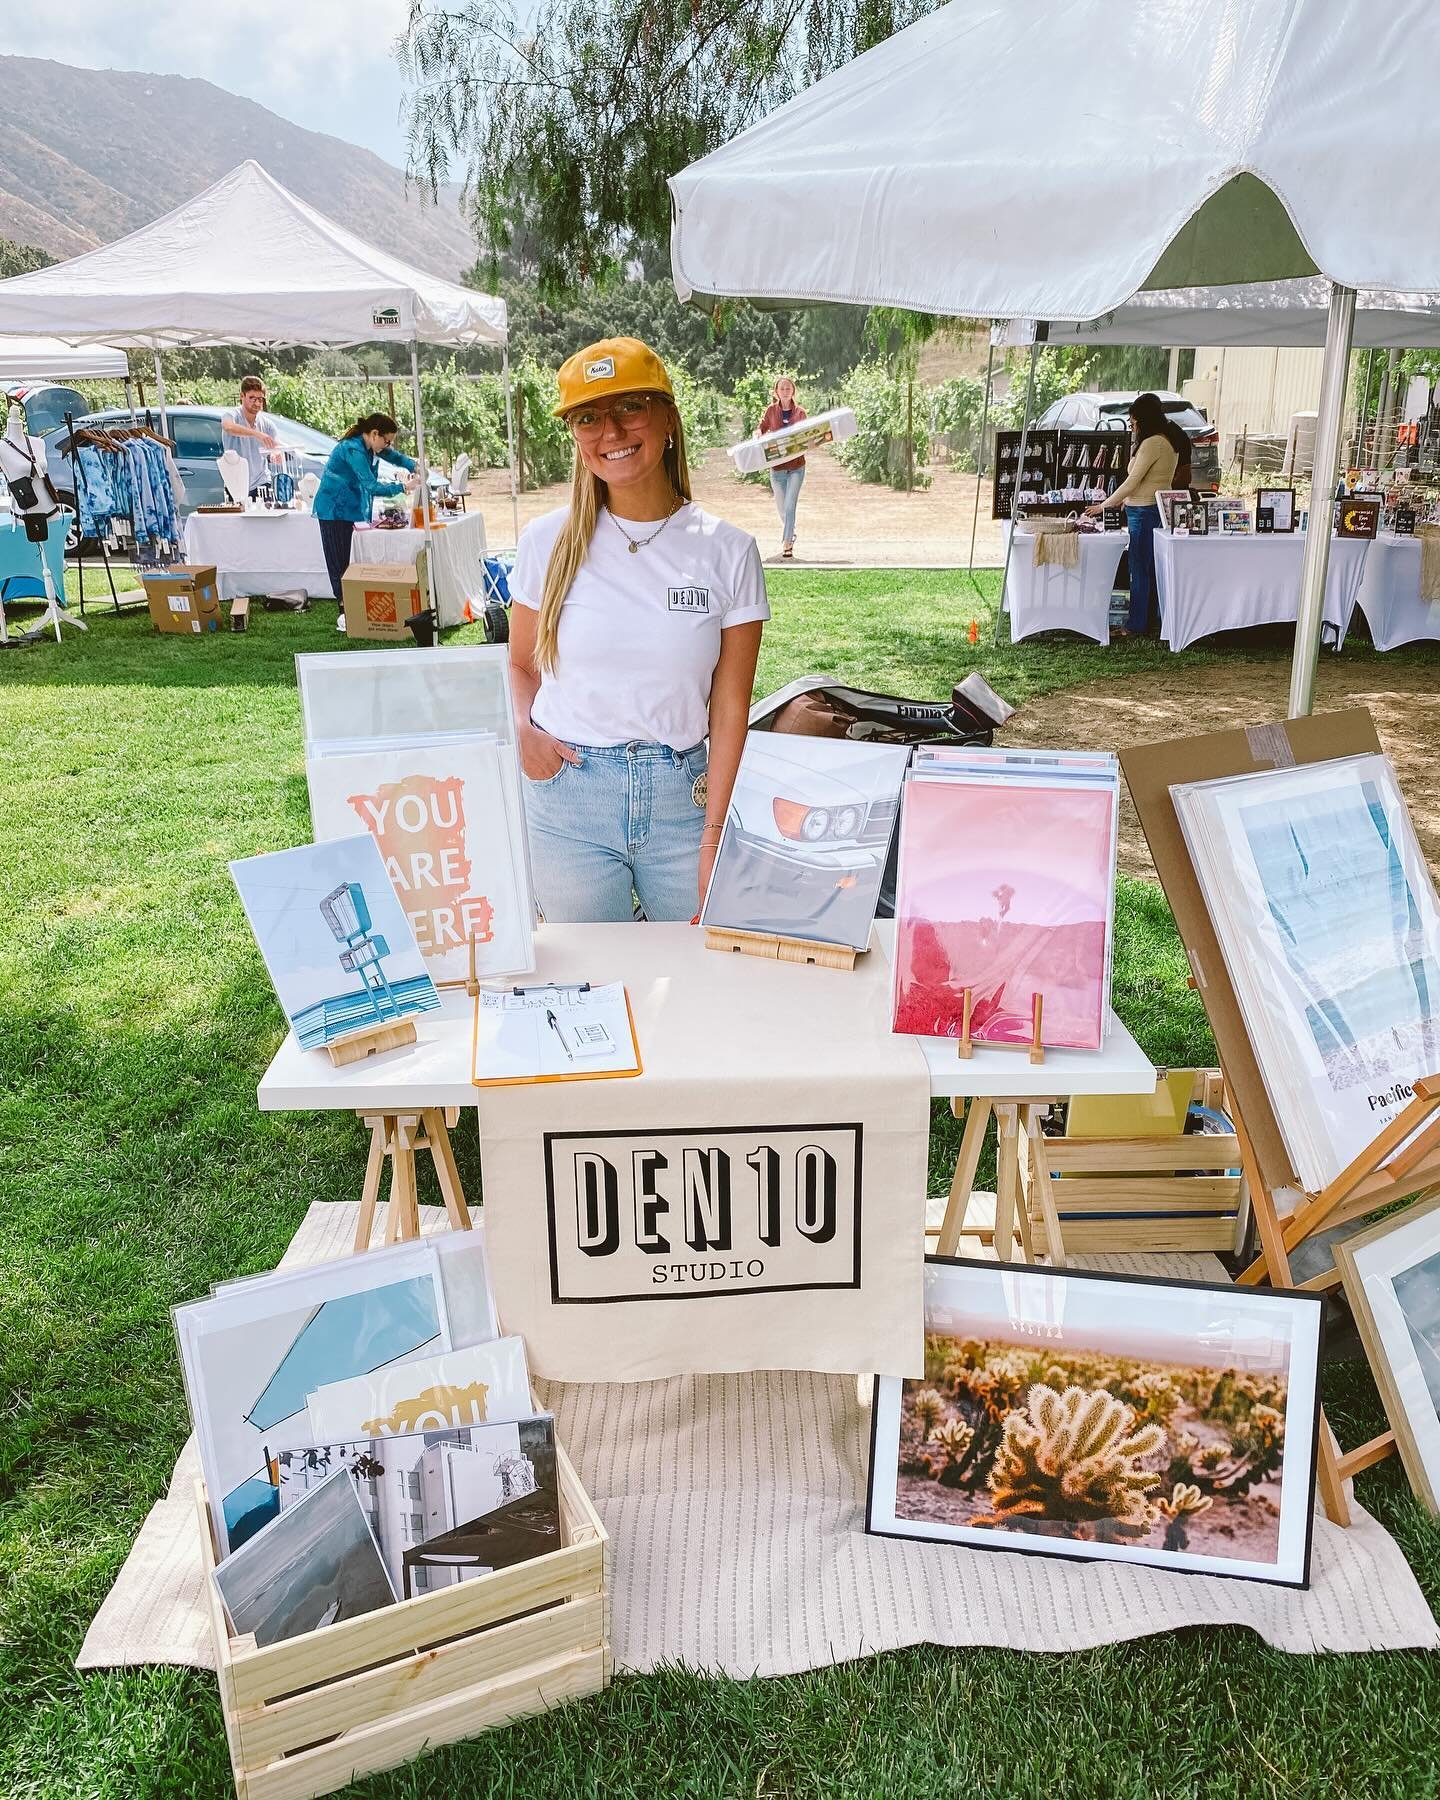 Did you know it&rsquo;s Art Fair season again?! Come see @anniedenten_ at the Escondido Street Festival @visitescondido at art In the Garden! This Sunday May 19th! 

Who: @den10studio and @anniedenten_ 
What: Art in the Garden, Escondido Street Festi